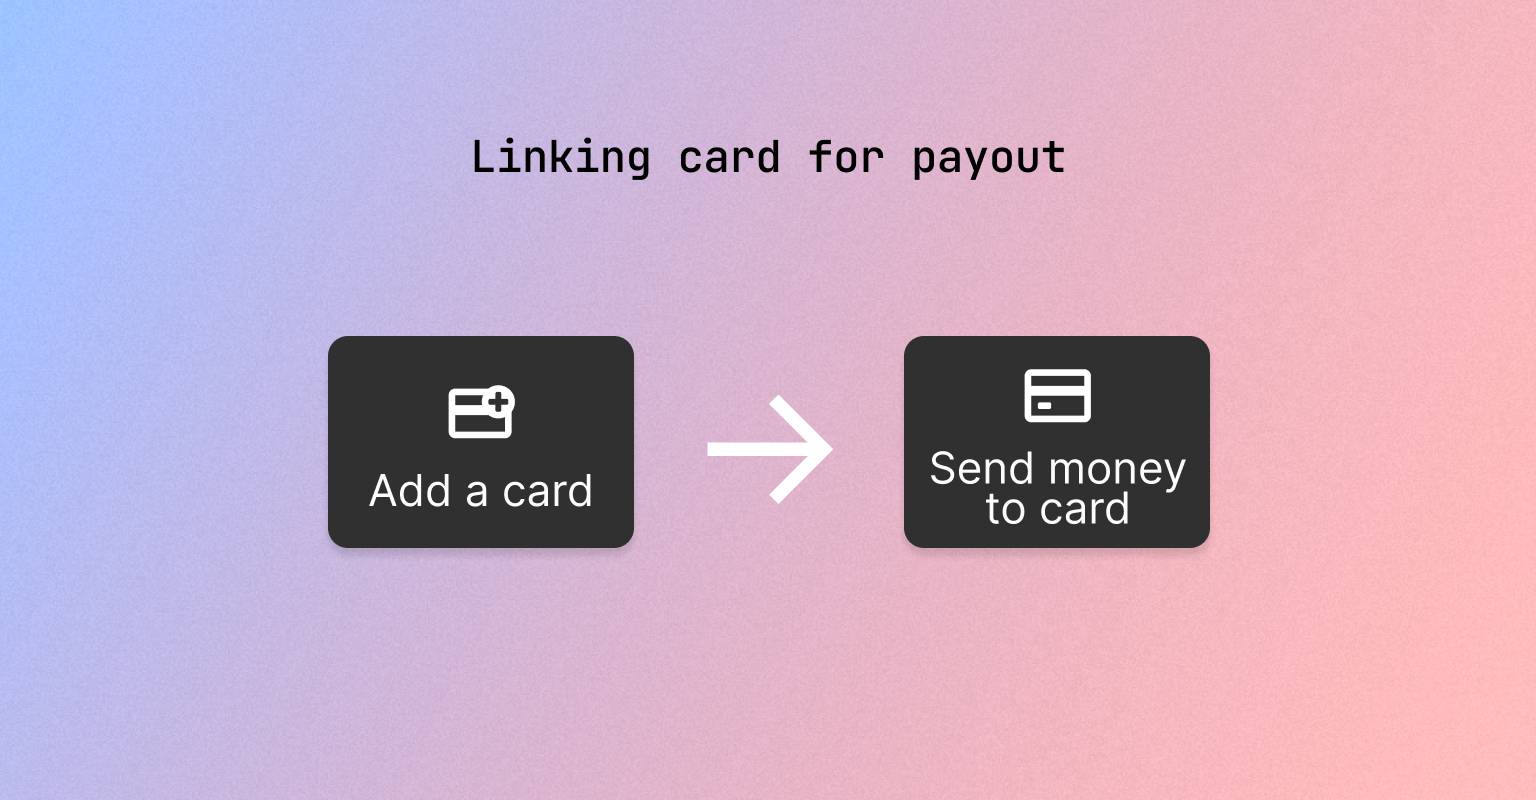 linking-card-for-payout.png
